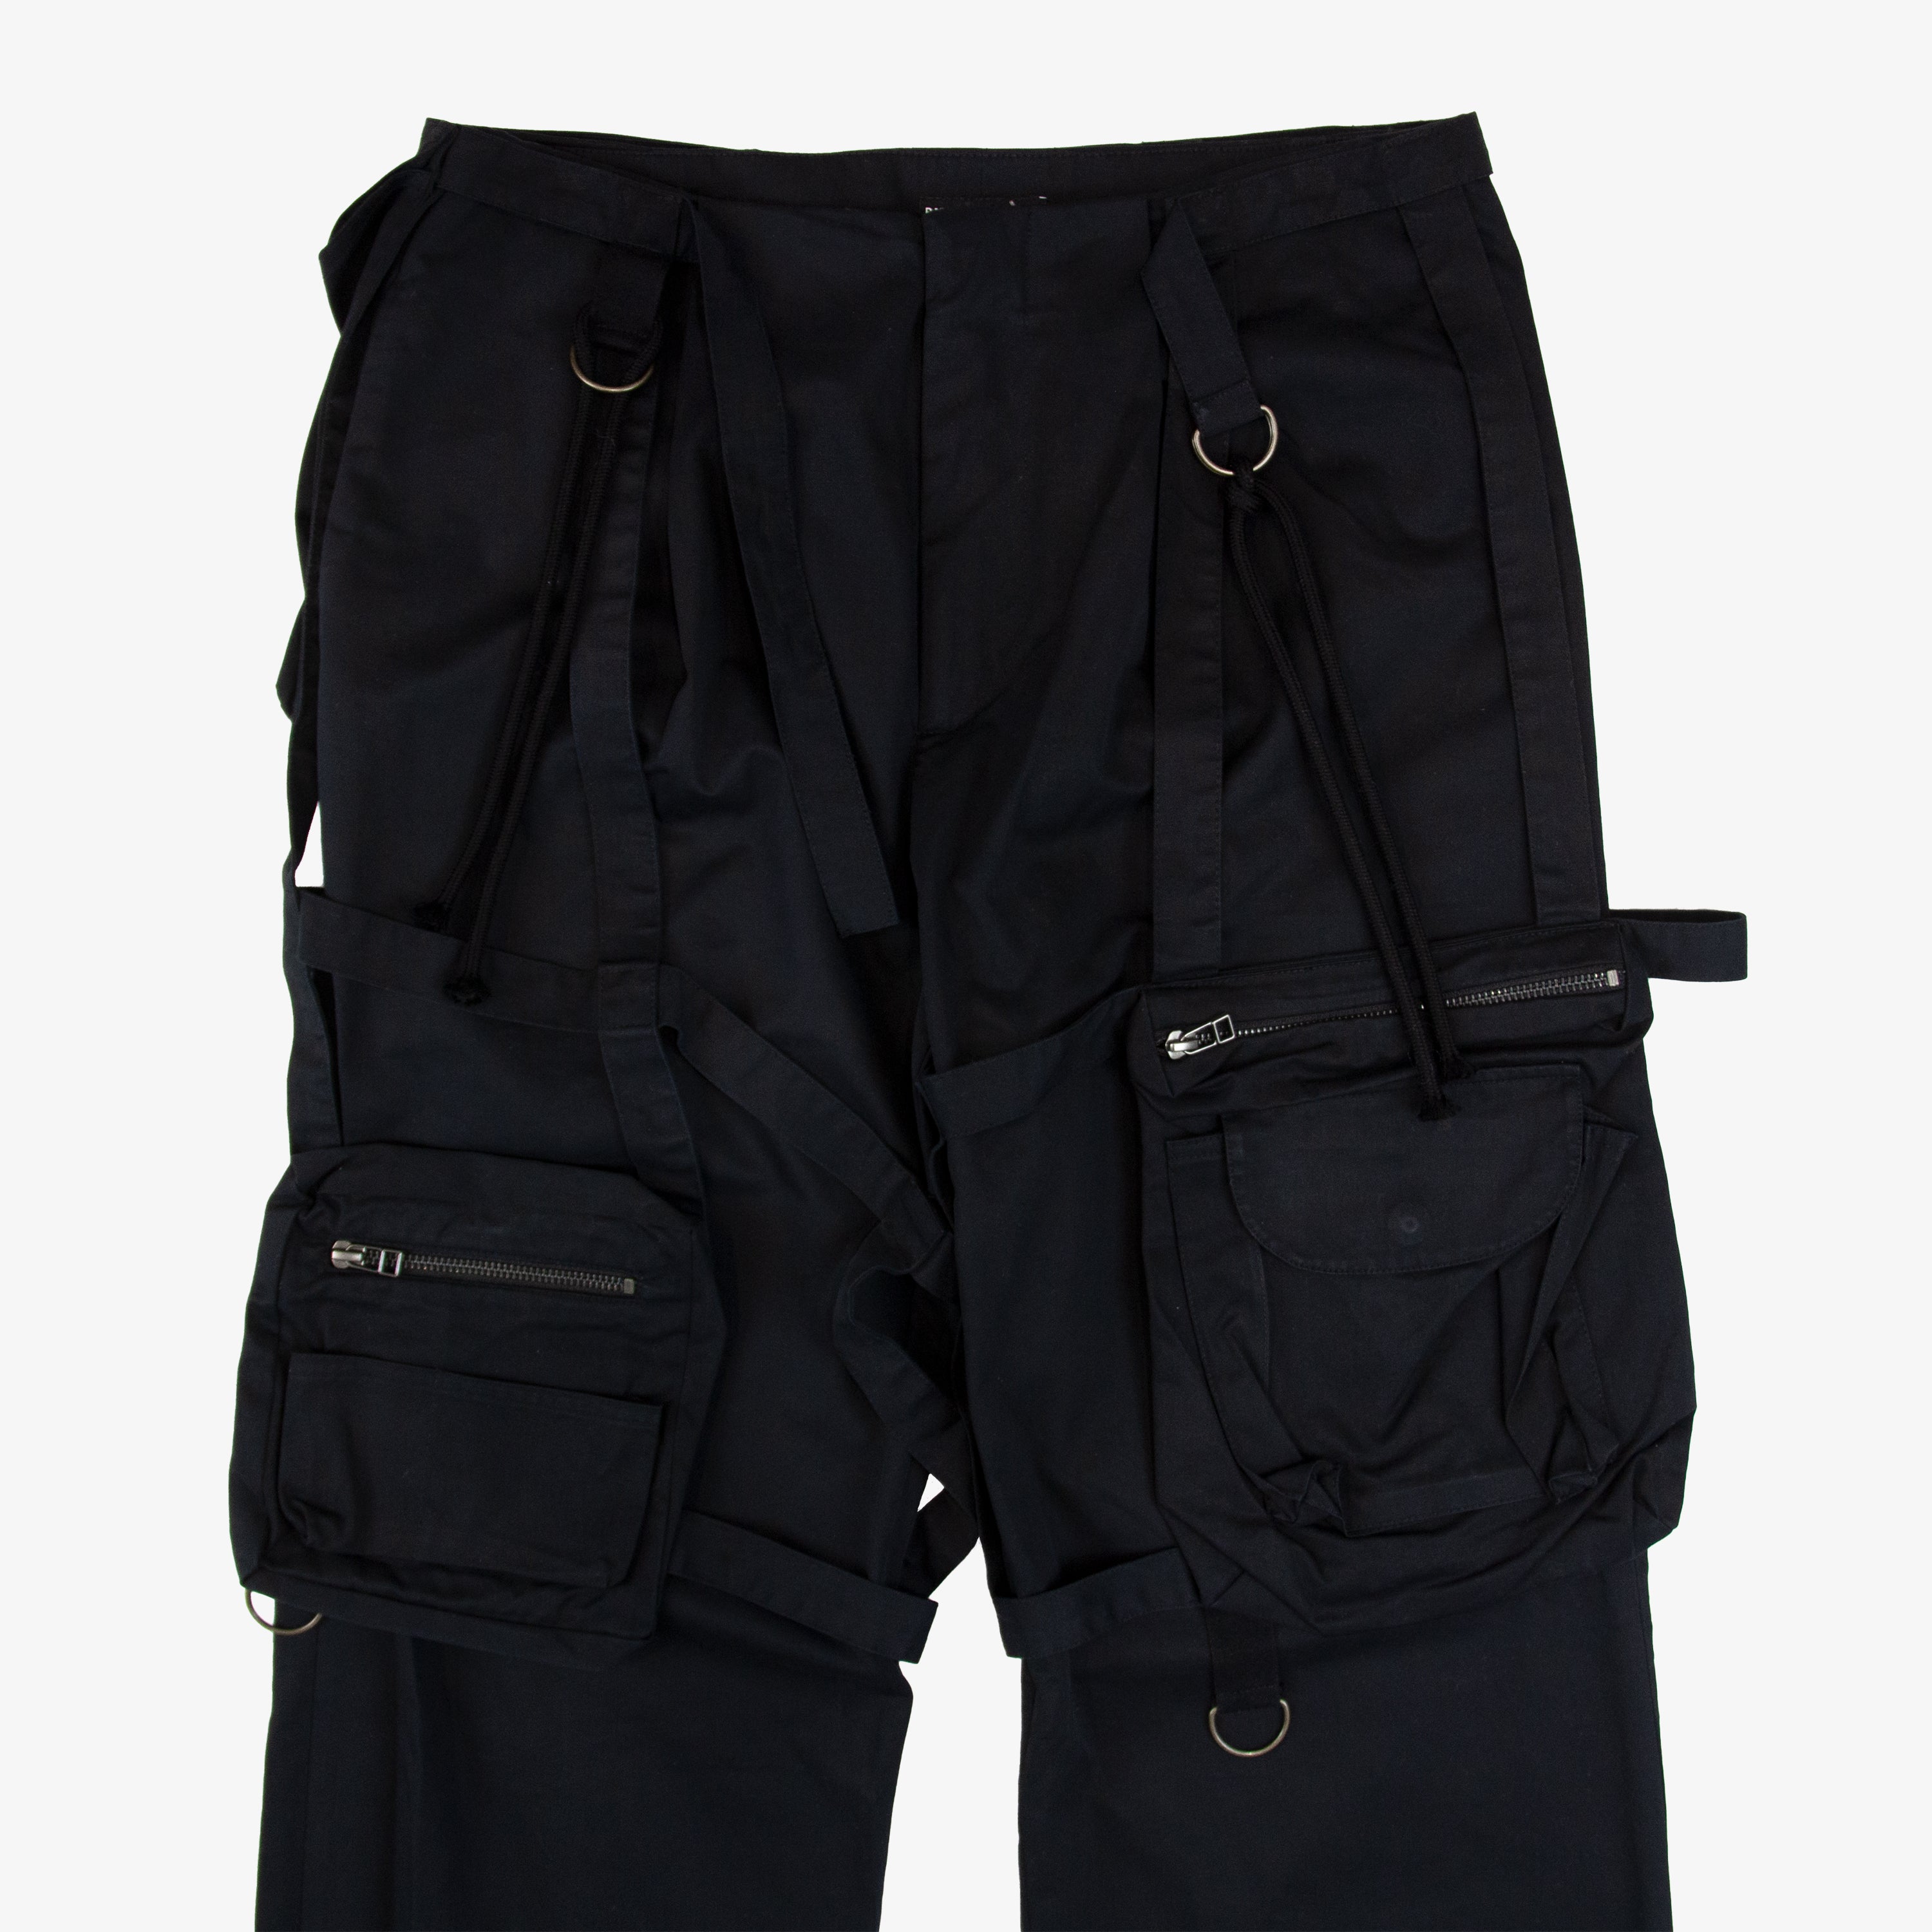 CONSUMED CARGO PANTS | 48